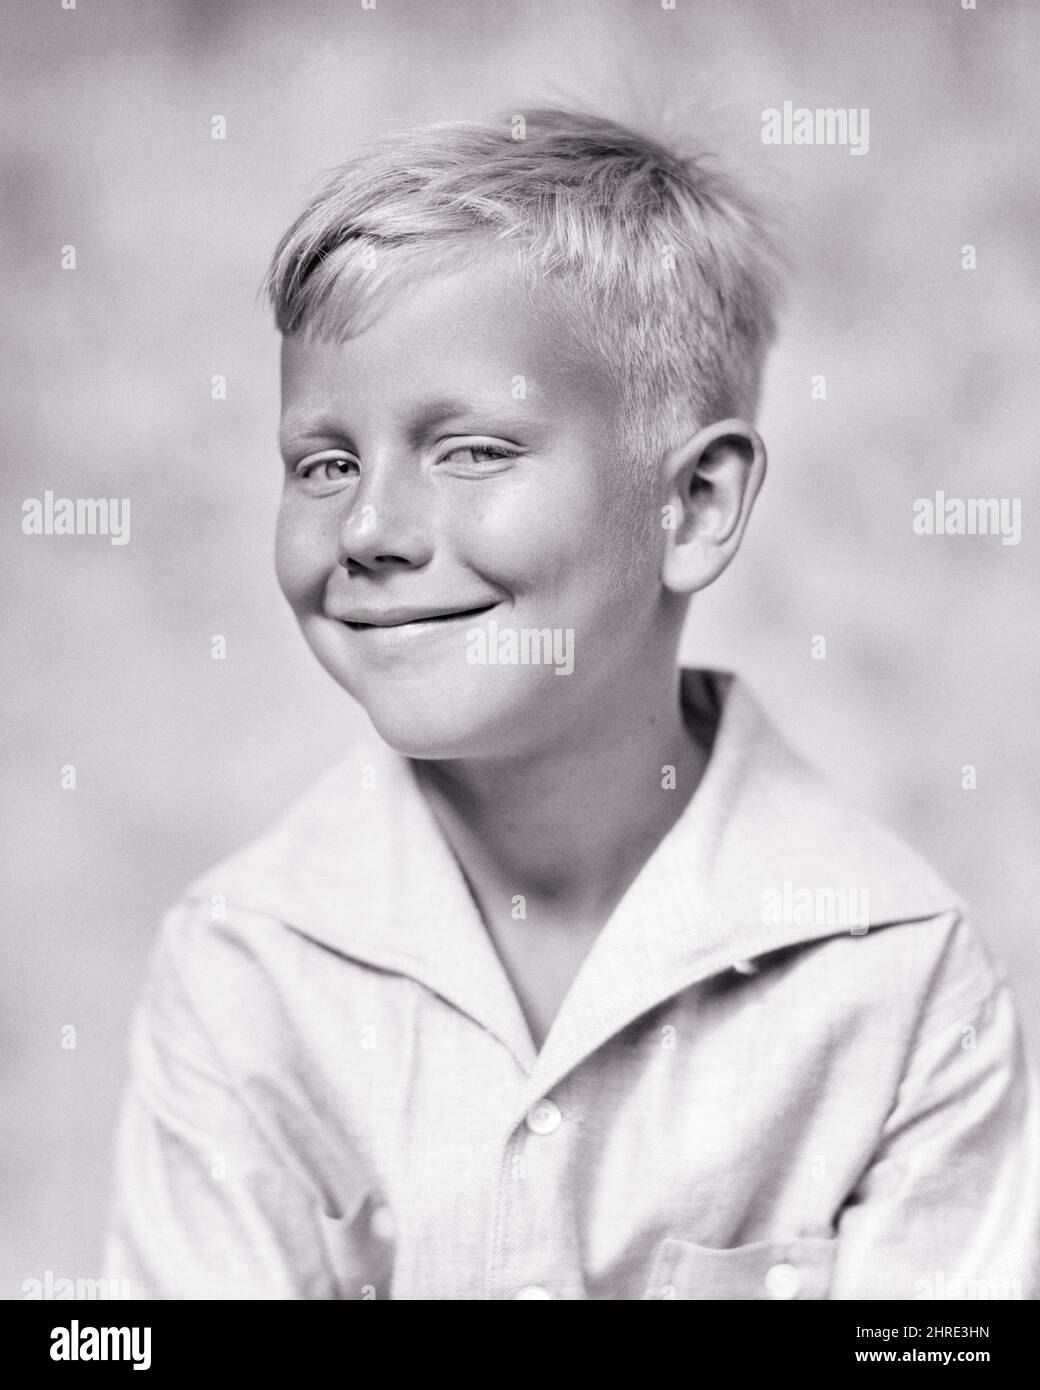 1930s SMILING BLONDE BOY LOOKING MISCHIEVIOUSLY PLAYFULLY AT THE CAMERA - j3170 HAR001 HARS B&W EYE CONTACT DREAMS HAPPINESS HEAD AND SHOULDERS CHEERFUL MISCHIEF SLY MISCHIEVOUS OPPORTUNITY SMILES IMP JOYFUL IMPISH GROWTH JUVENILES TROUBLEMAKER TROUBLESOME BLACK AND WHITE CAUCASIAN ETHNICITY HAR001 OLD FASHIONED Stock Photo